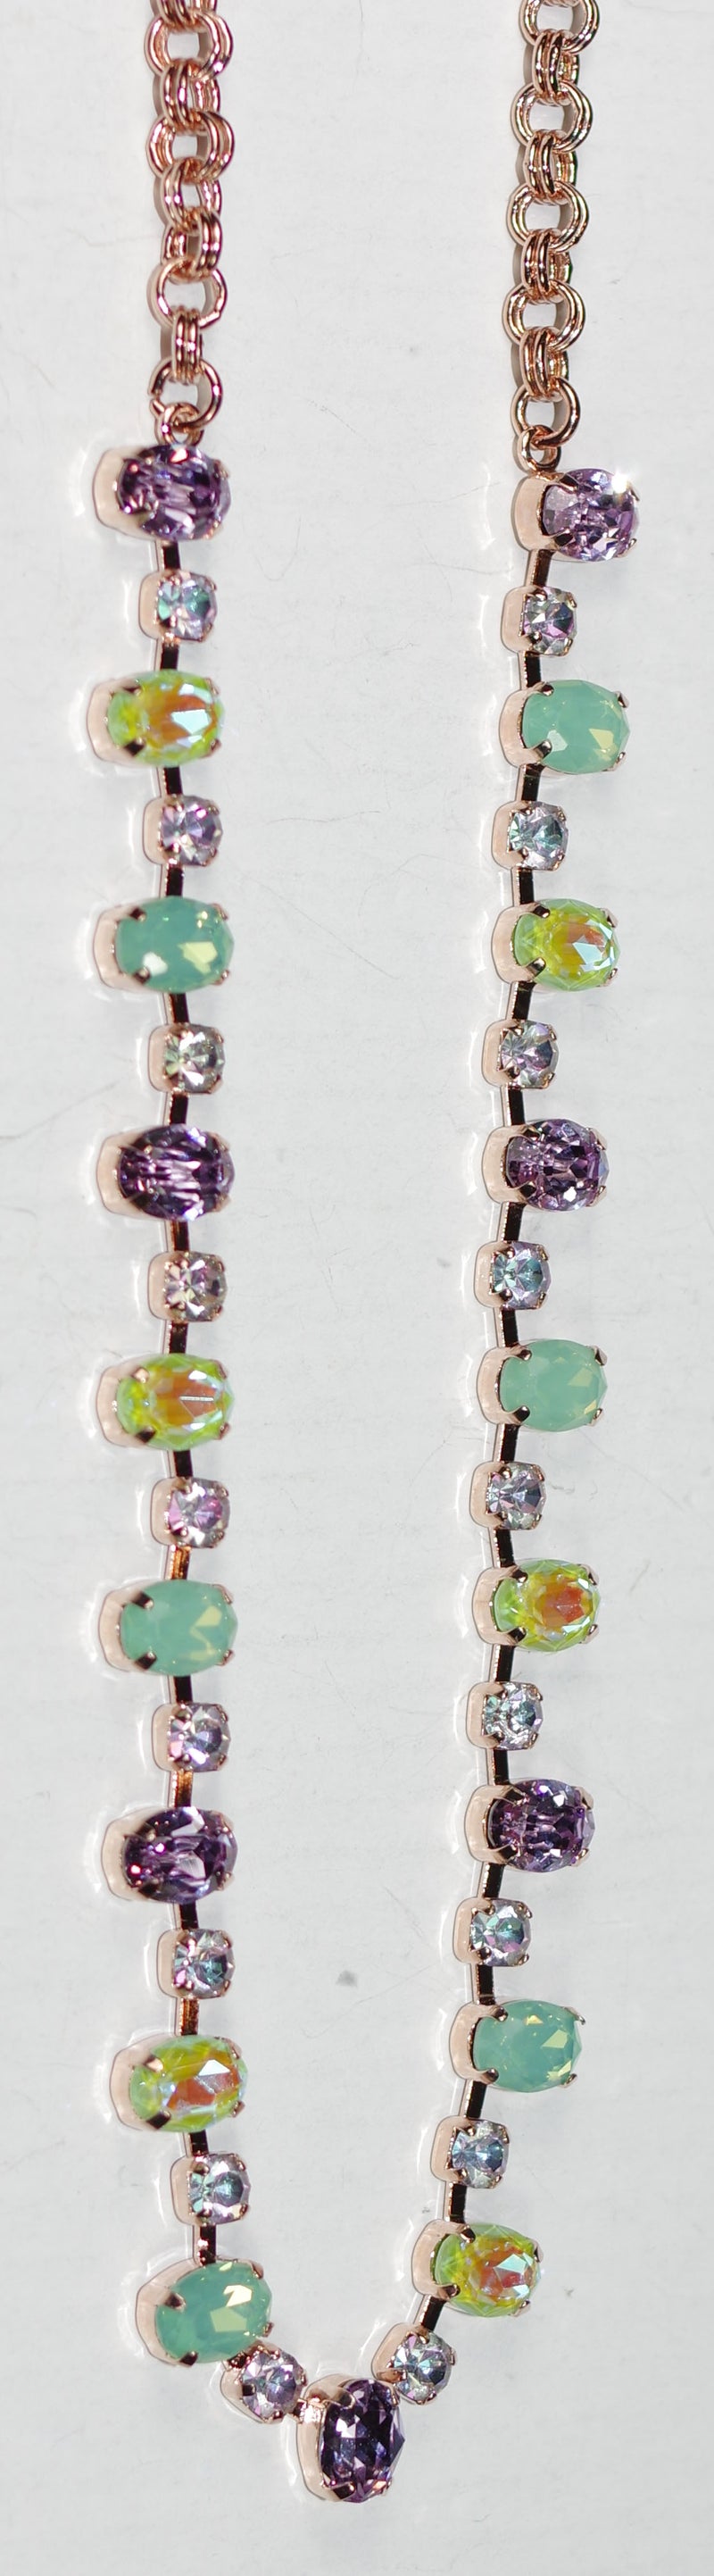 MARIANA NECKLACE MINT CHIP: green, purple, sun kissed stones in rosegold setting, 18" adjustable chain